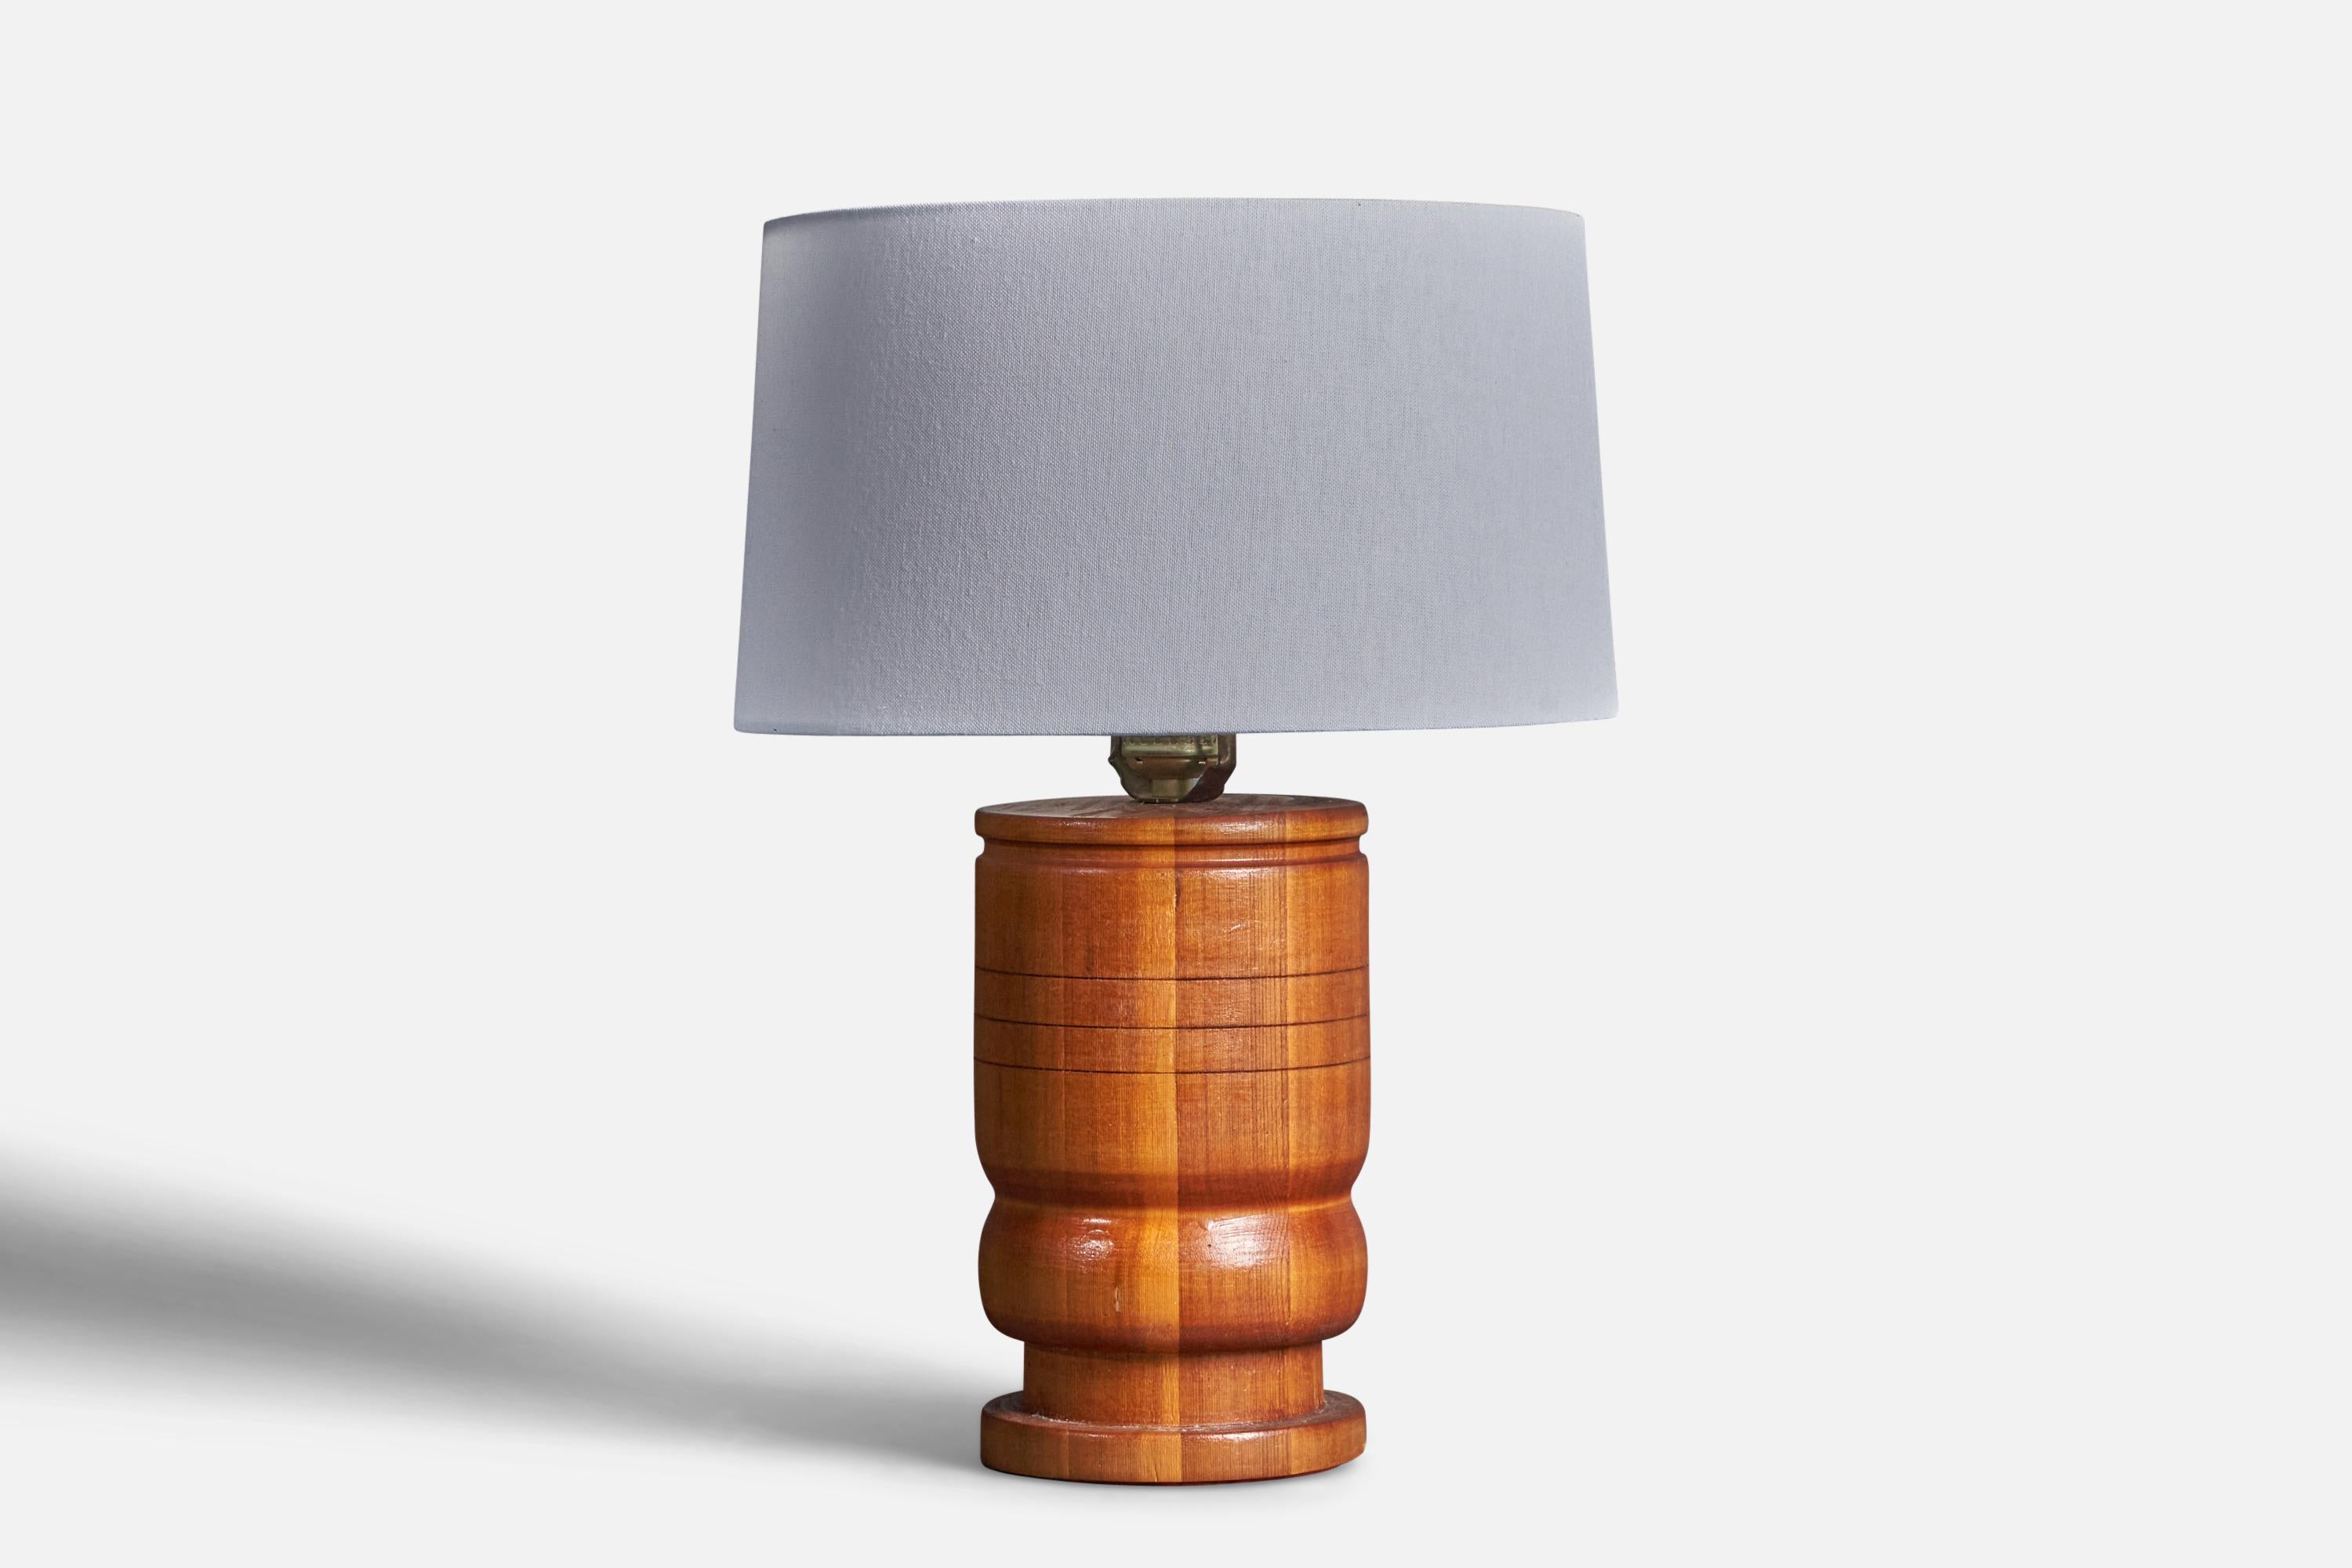 Mid-20th Century American Designer, Freeform Table Lamp, Solid Wood, Fabric, United States, 1960s For Sale